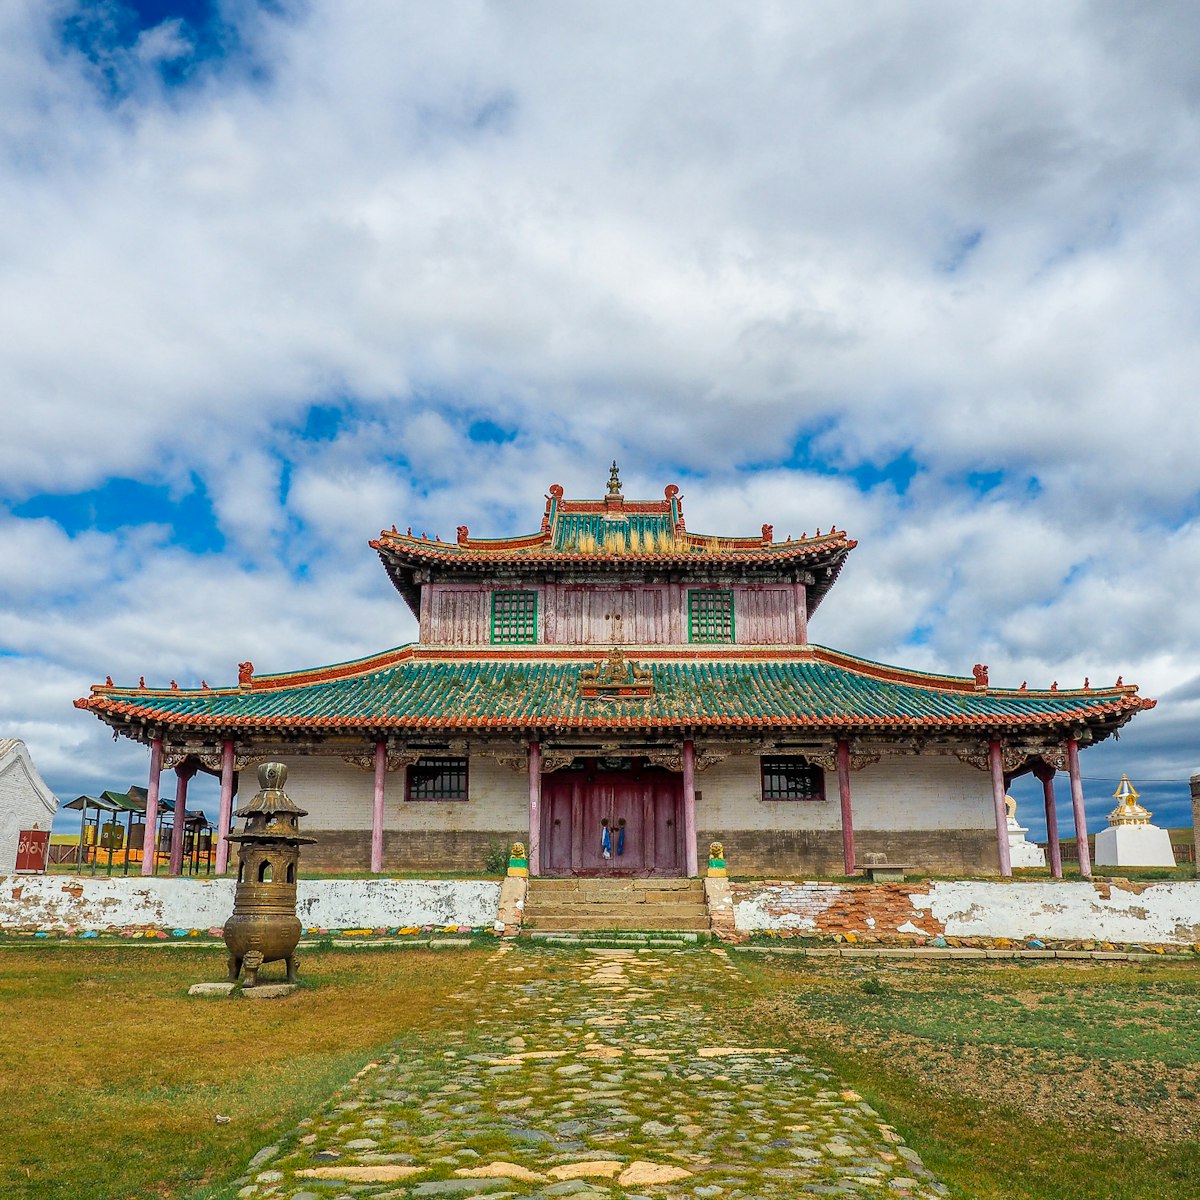 Kharkhorin, Mongolia 4th July 2019: Shankh Khiid Monastery opened in 1648 and used to house 1500 monks before it closed in 1937. Reopened in the early 1990s, today it is home to 25 monks.
1218476559